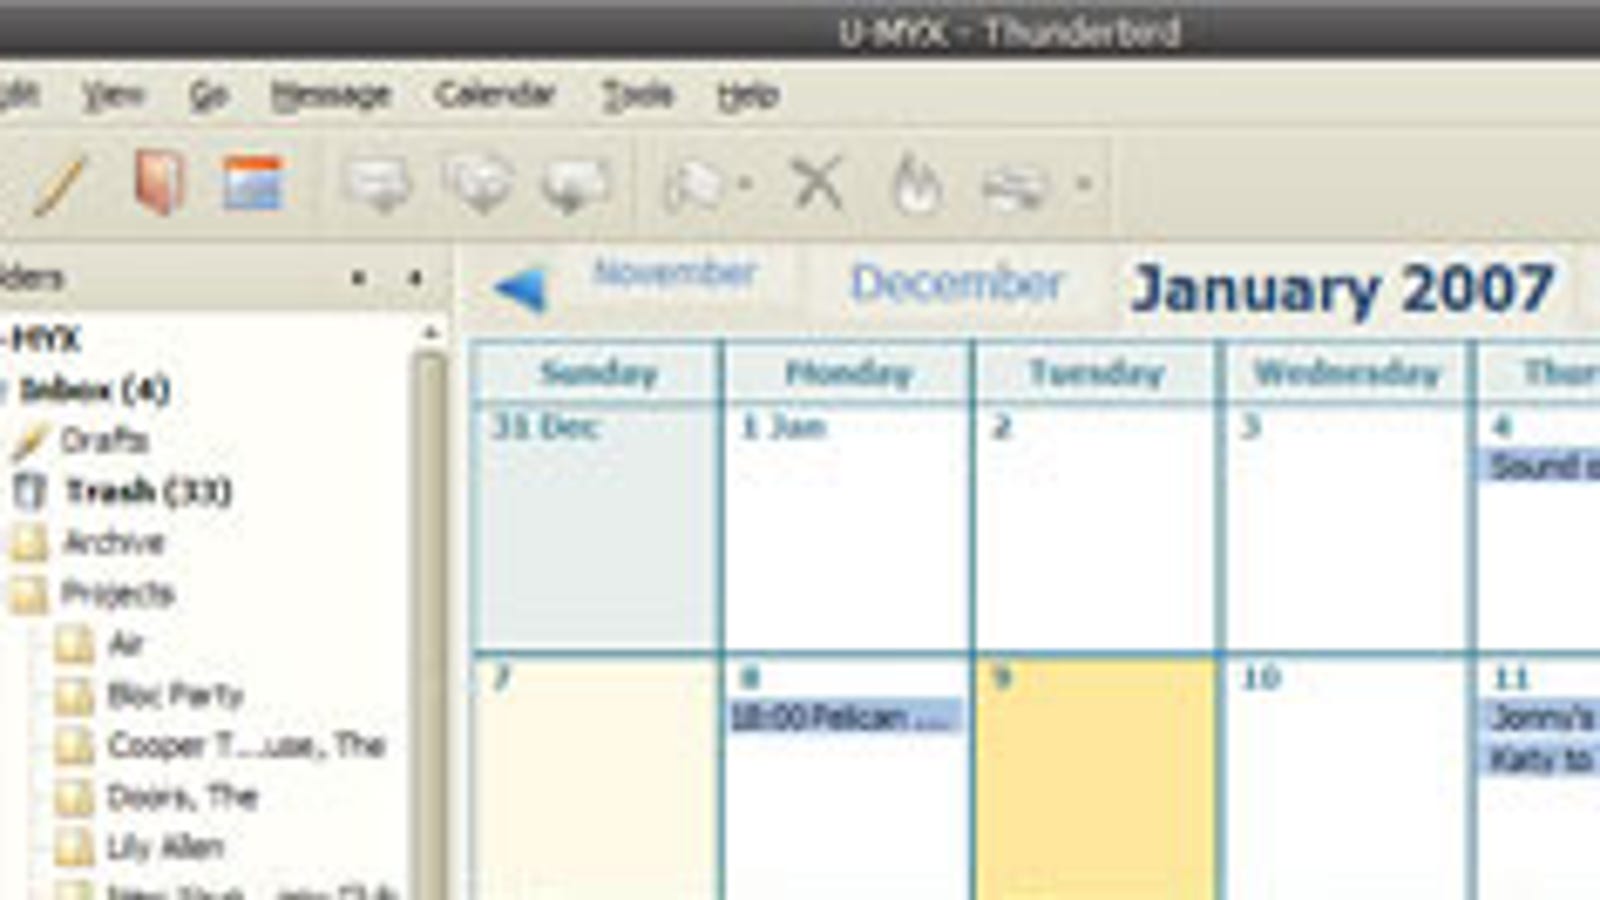 View and update Google Calendar with Thunderbird